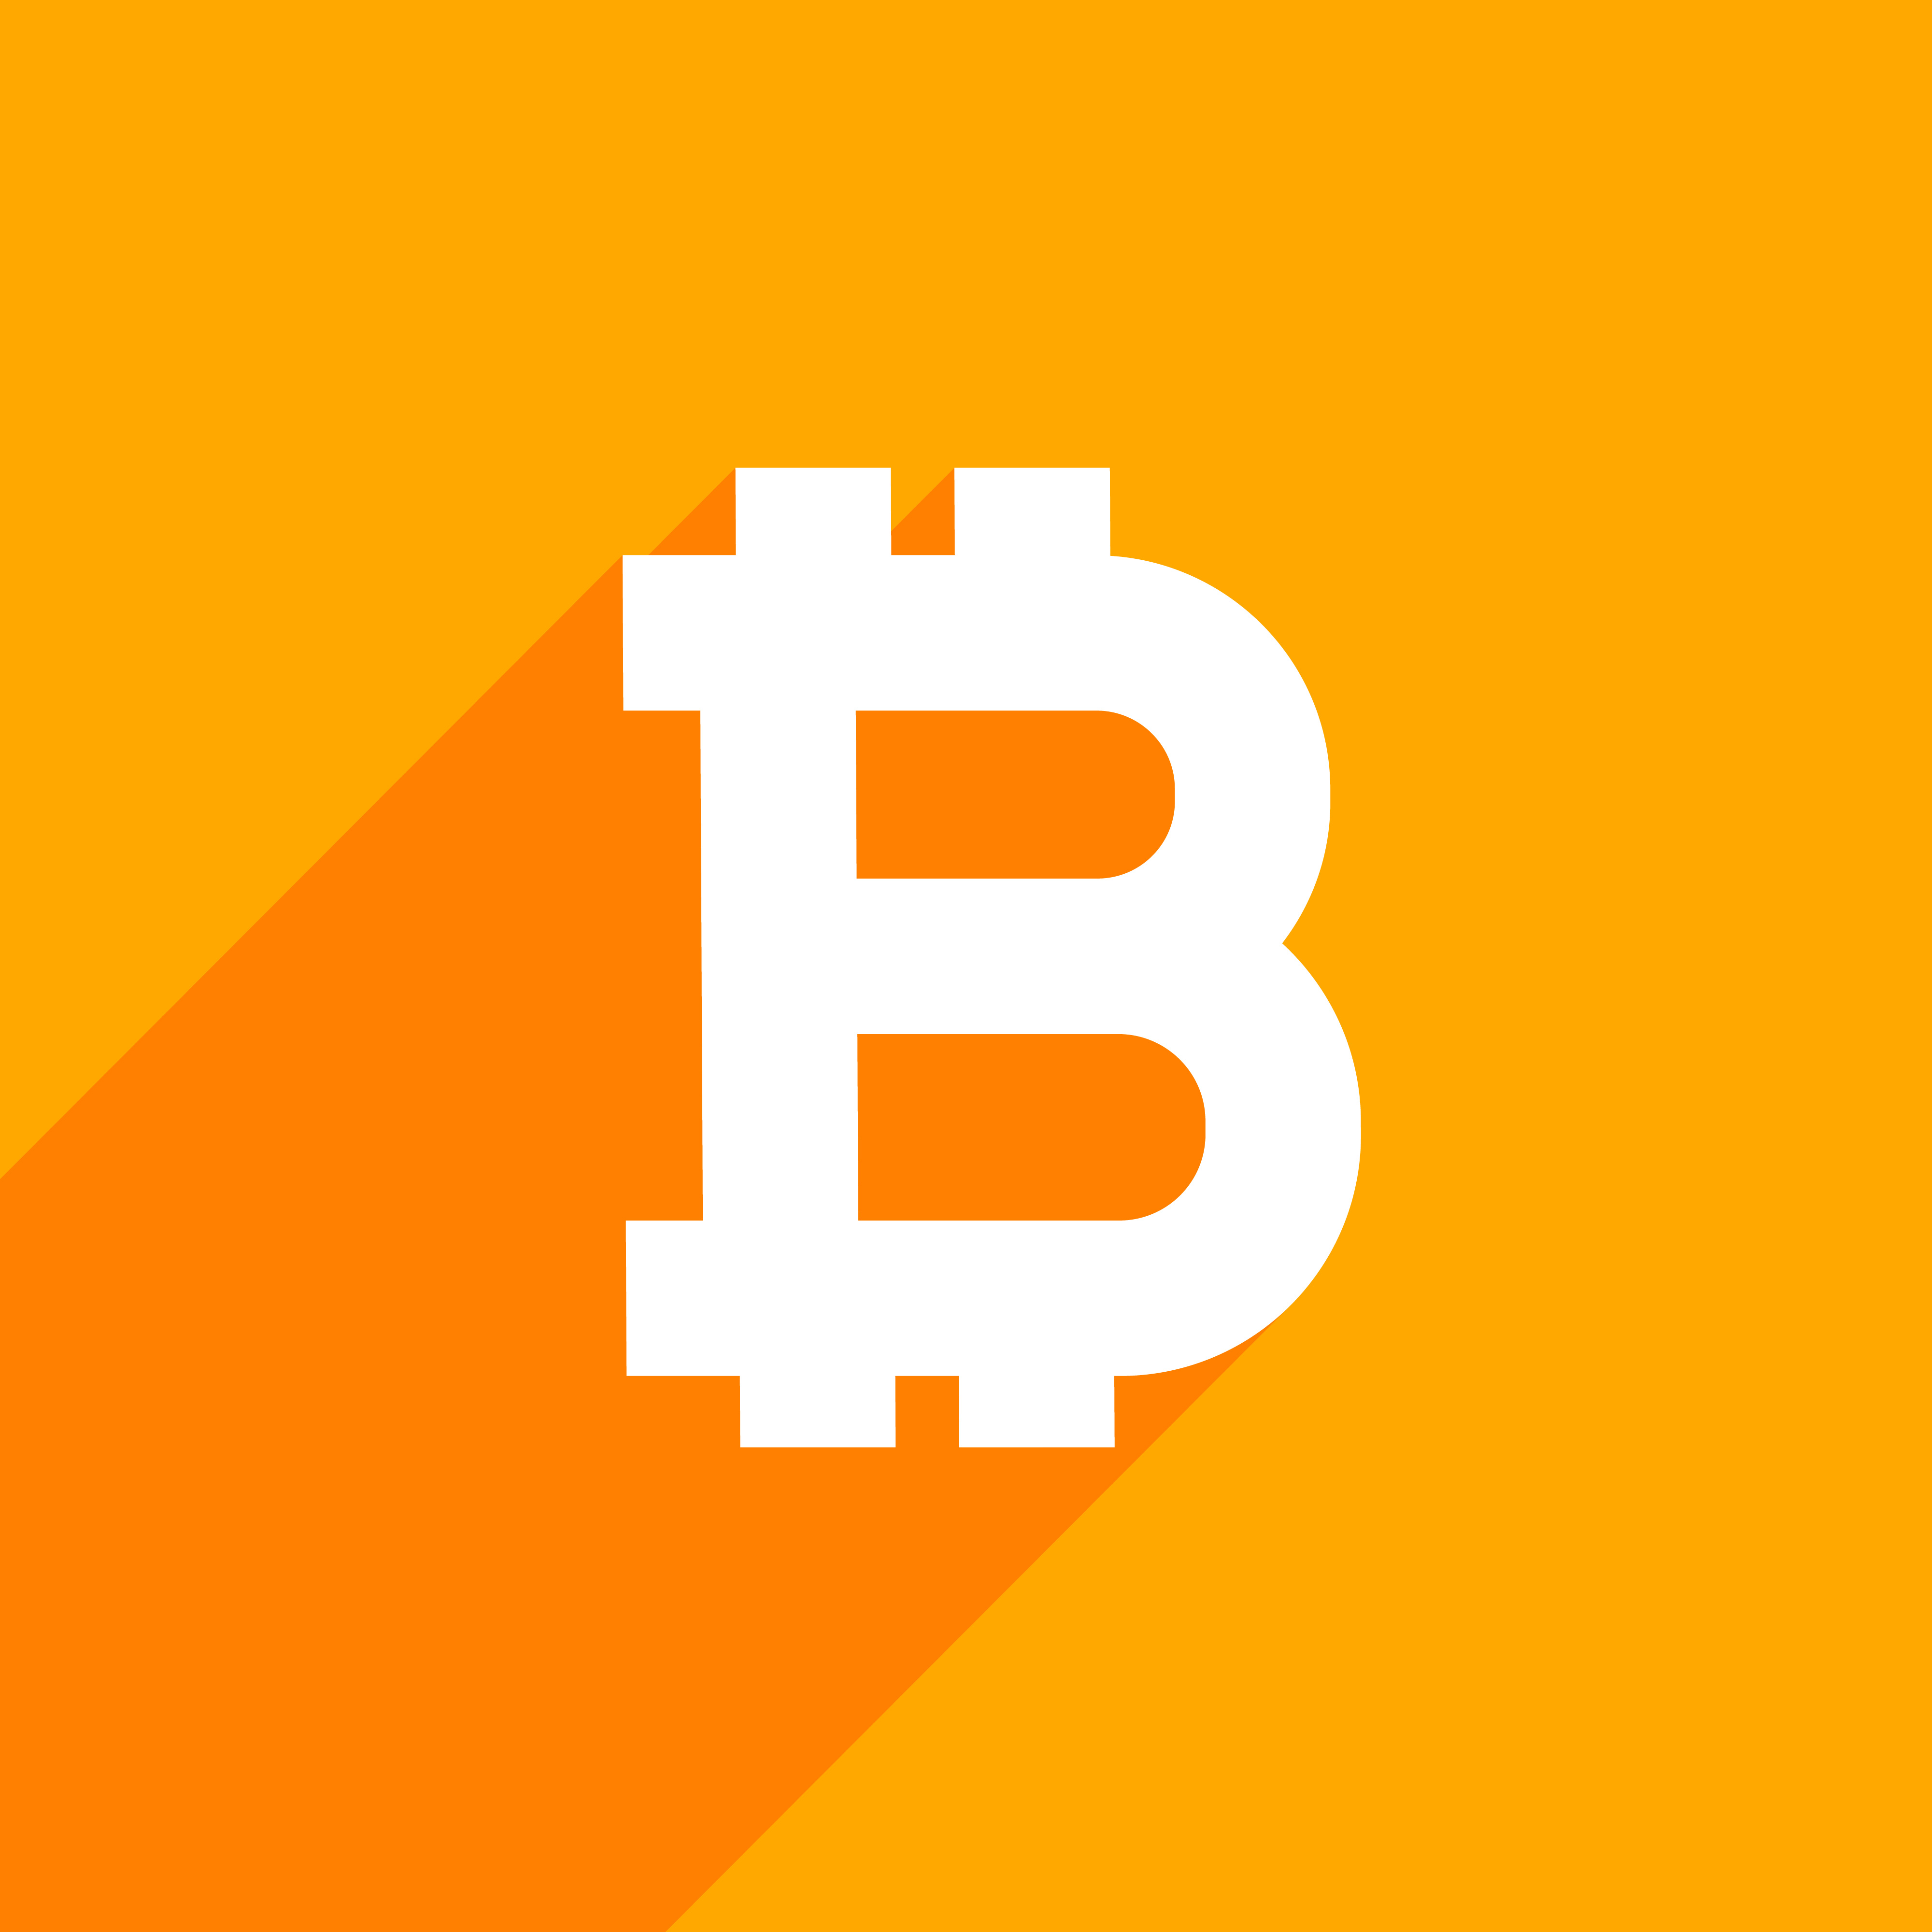 Bitcoin Symbol - bitcoin symbol 3d 3ds - By far the most commonly used symbol for bitcoin is B&w Companion Fifth Wheel Slider Hitch Rvk3405